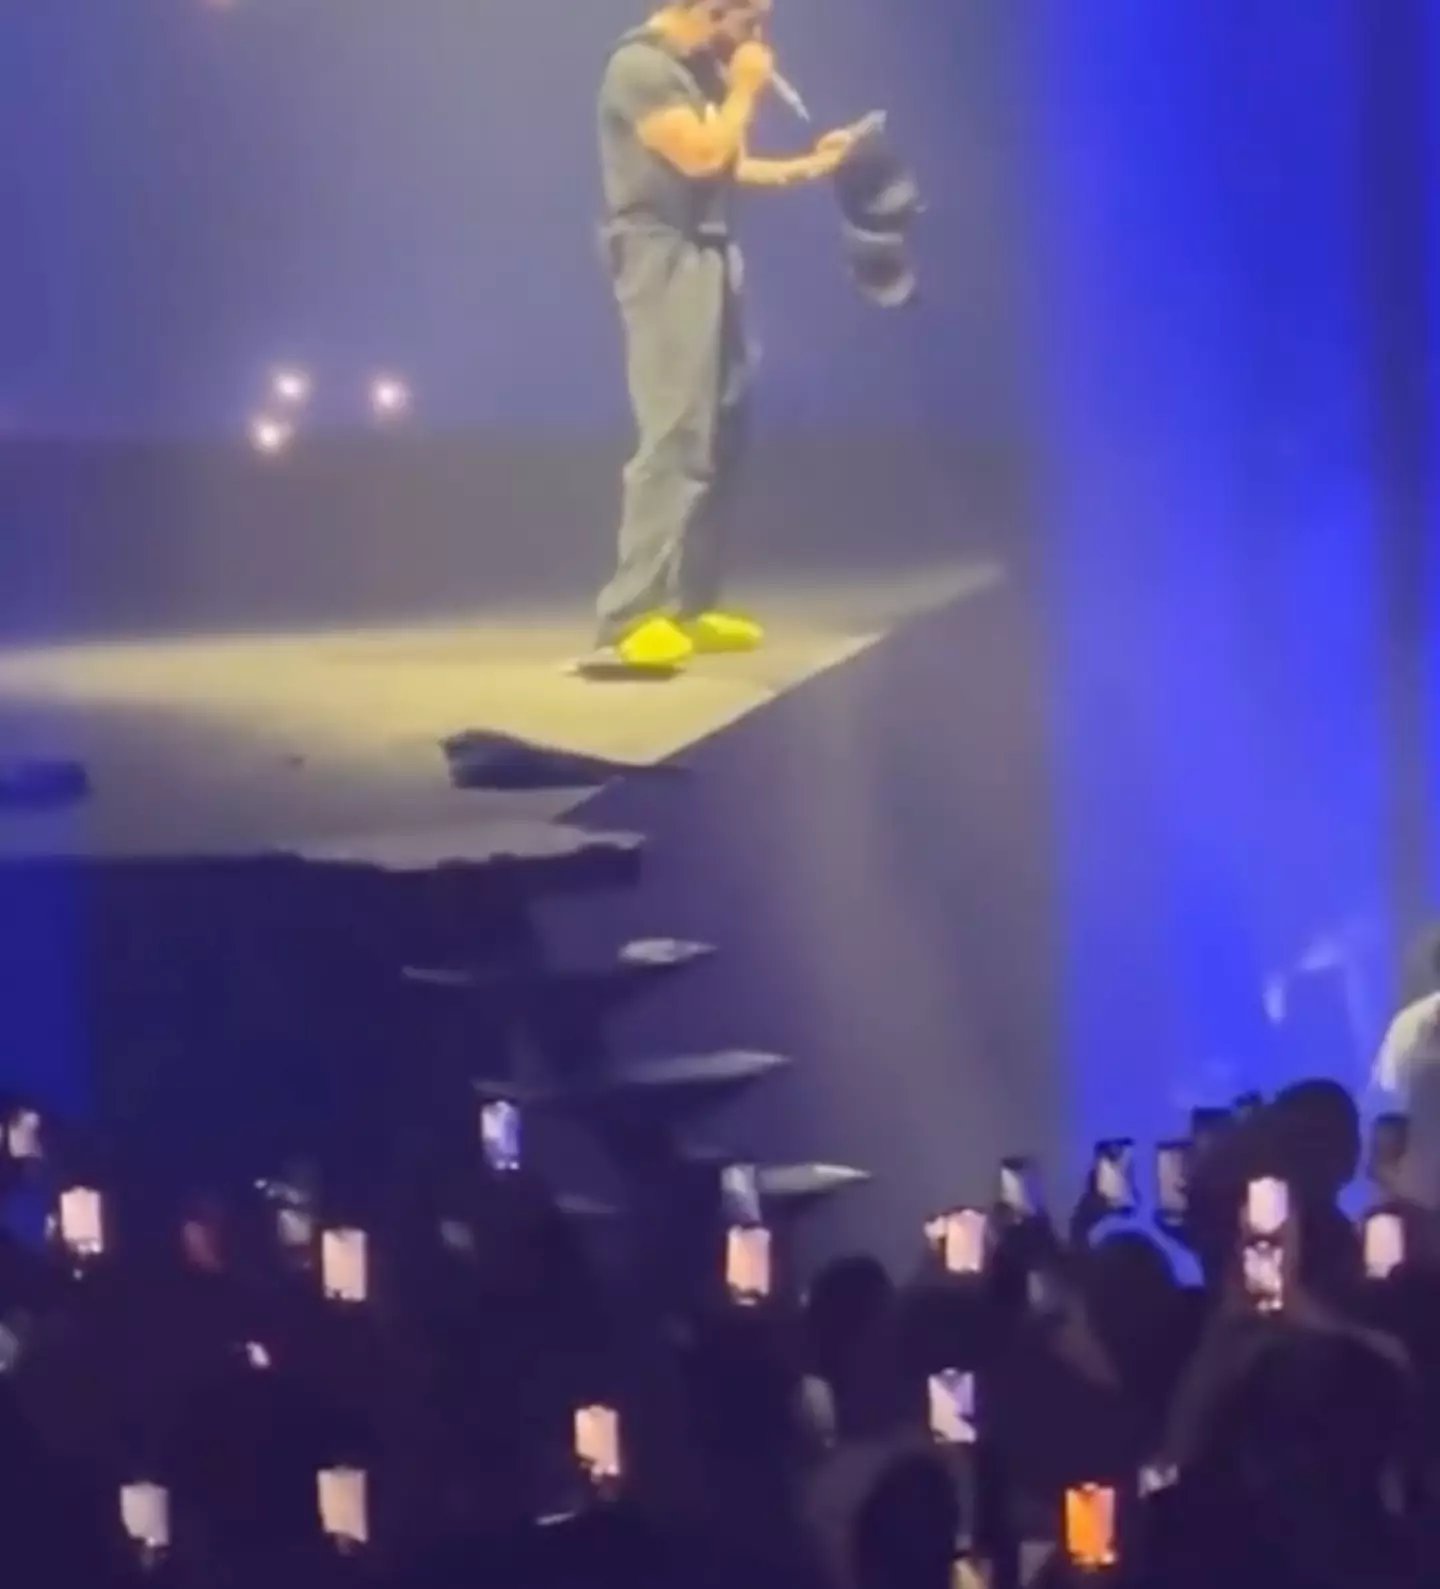 RapTV on X: Drake receives largest bra while on stage 😳‼️ https